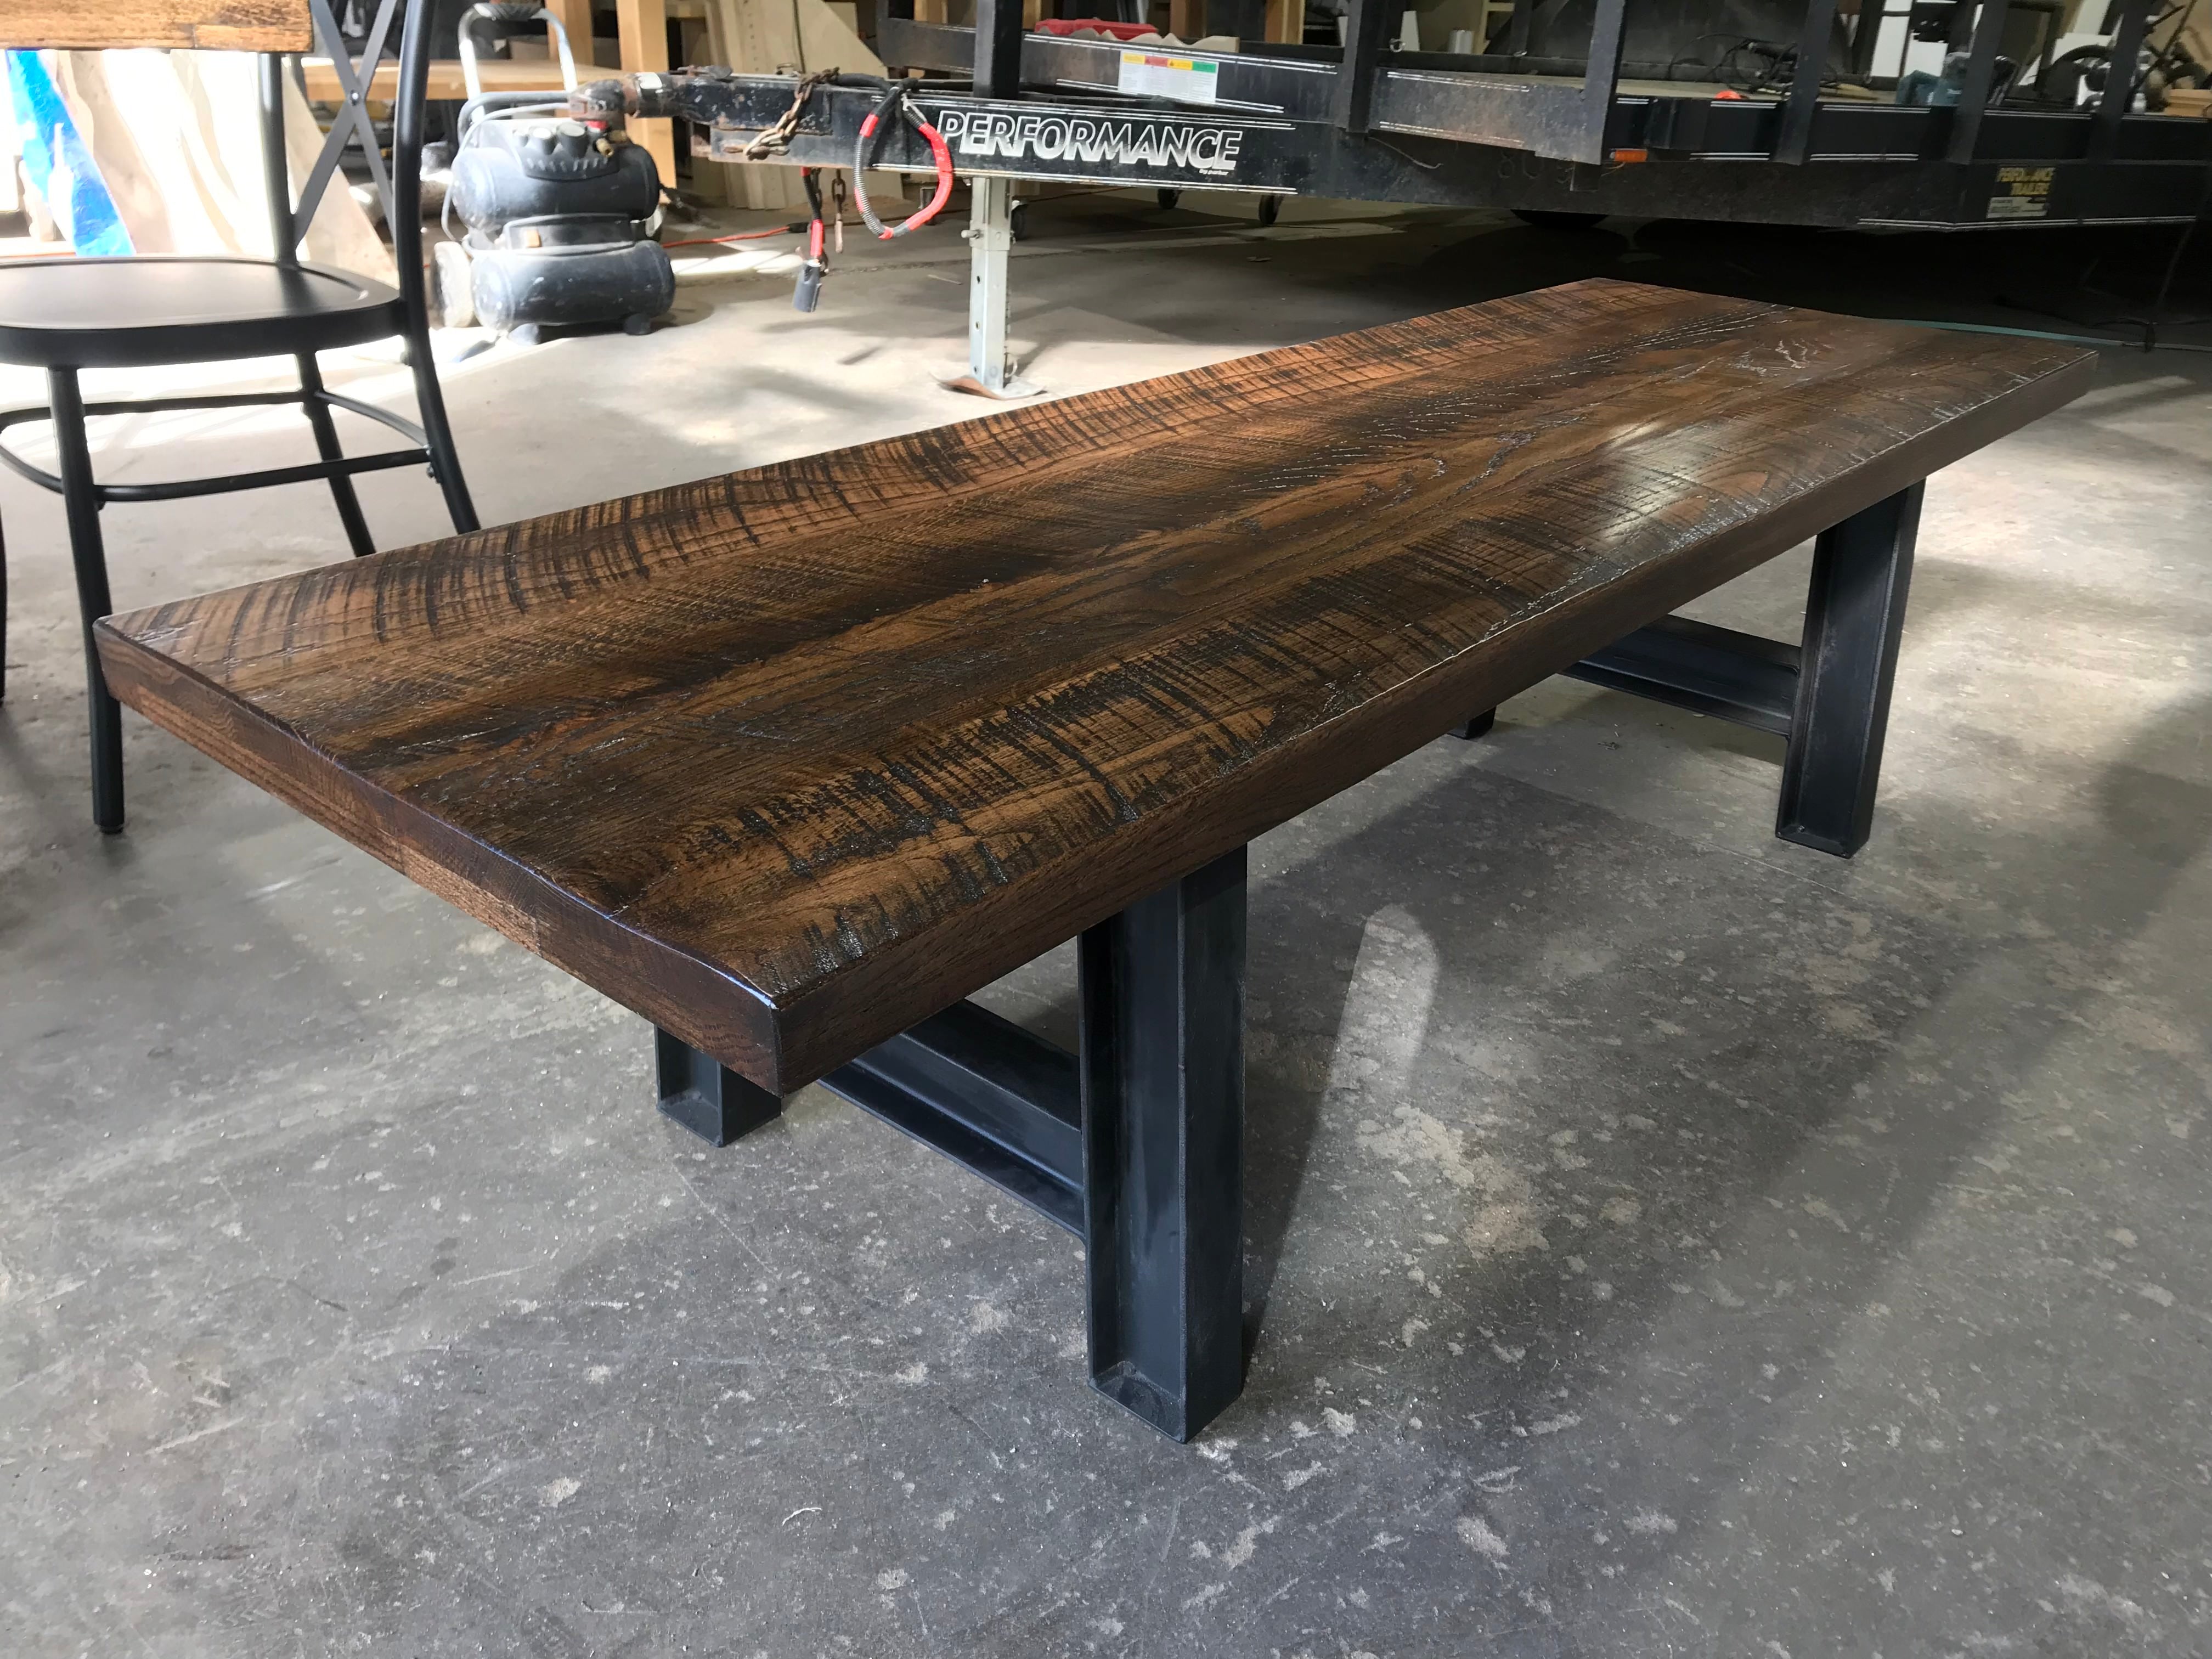 The Industrial A-Frame Bench